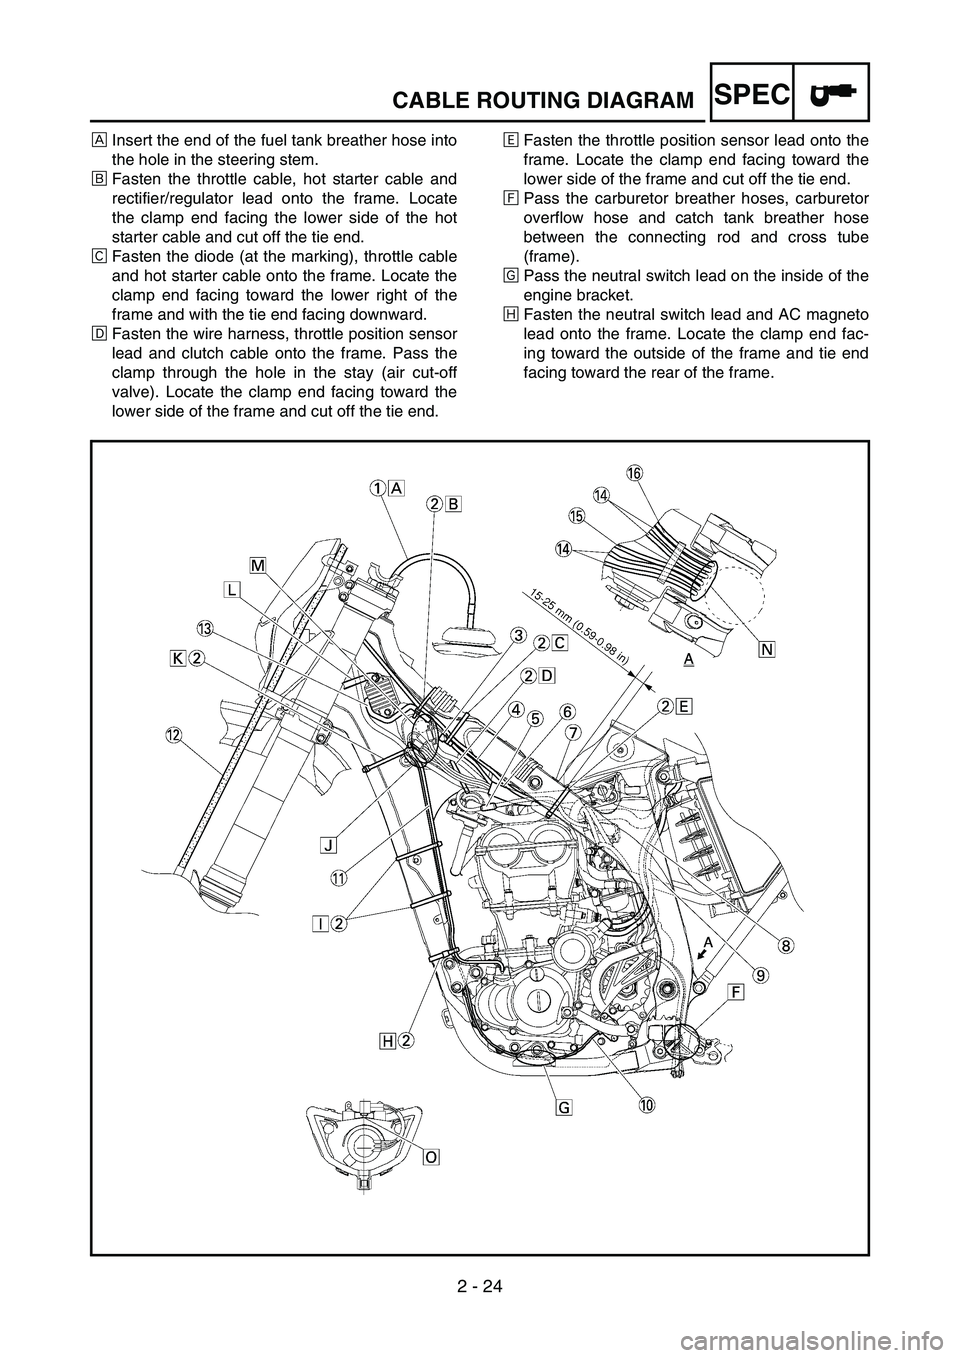 YAMAHA WR 450F 2007  Owners Manual 2 - 24
SPECCABLE ROUTING DIAGRAM
ÈInsert the end of the fuel tank breather hose into
the hole in the steering stem.
ÉFasten the throttle cable, hot starter cable and
rectifier/regulator lead onto th